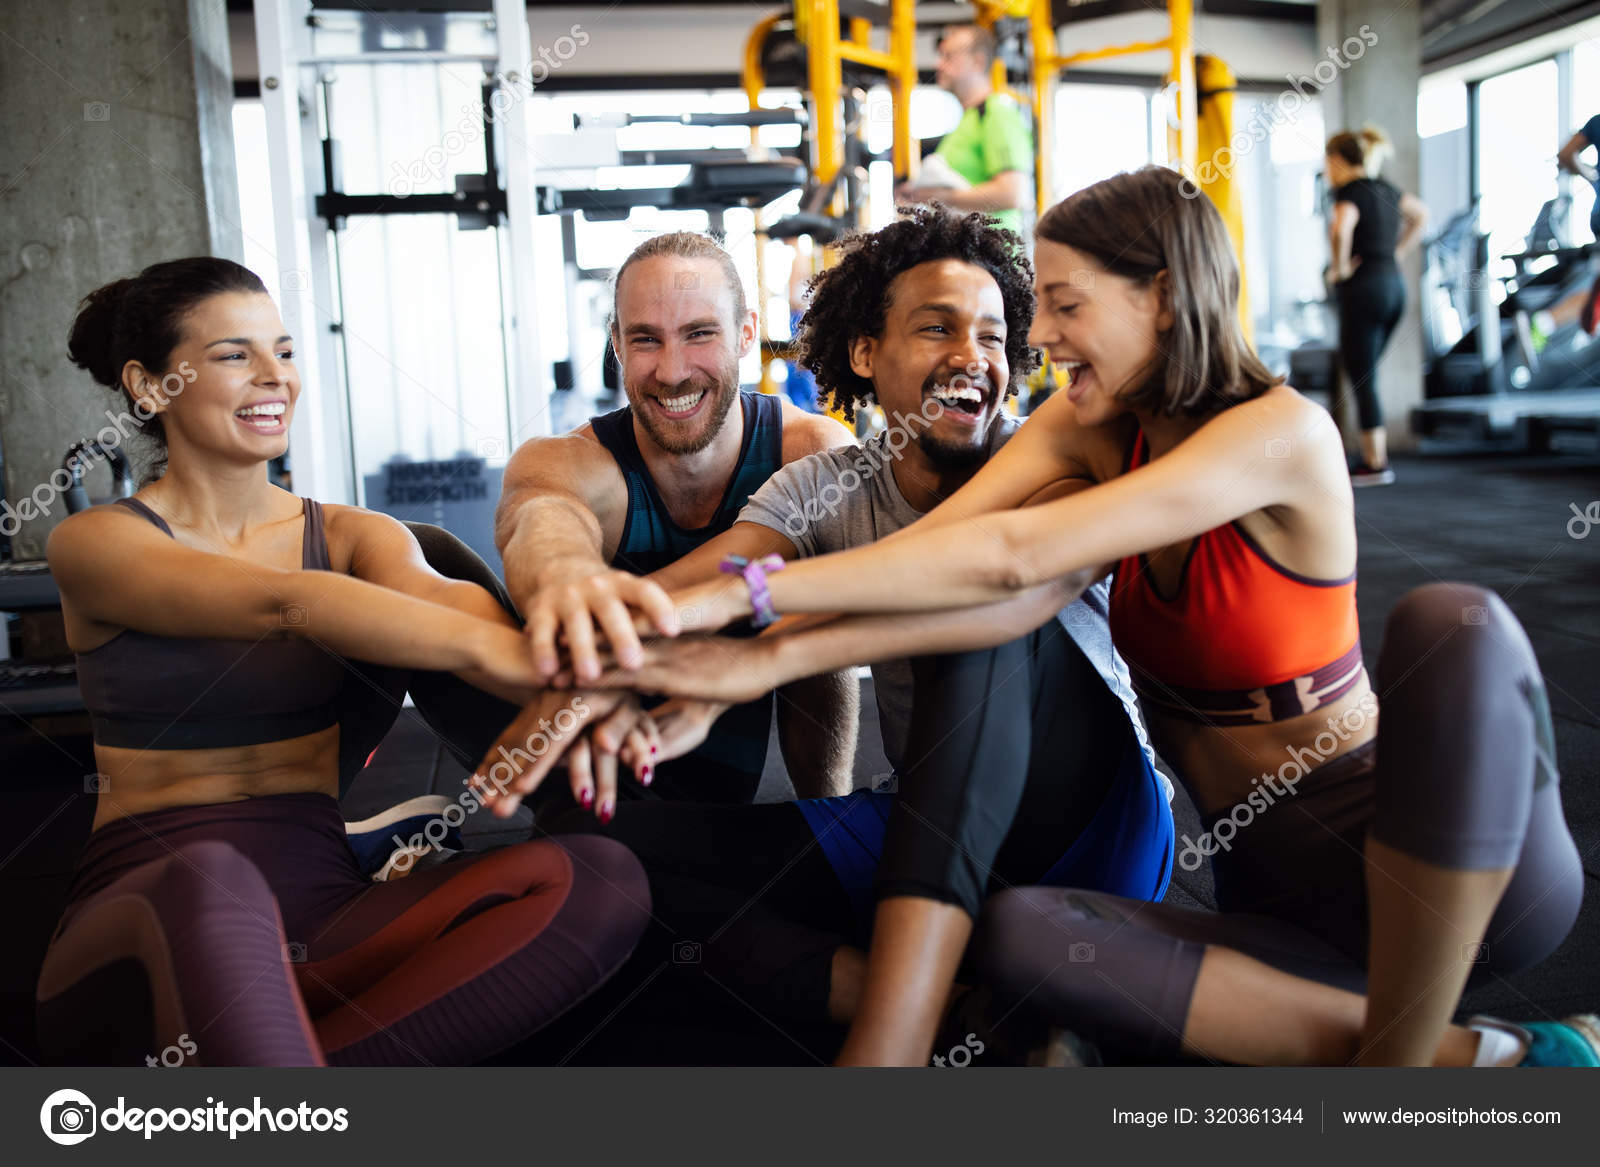 Happy Fit People Exercising Working Out Gym Stay Healthy Together